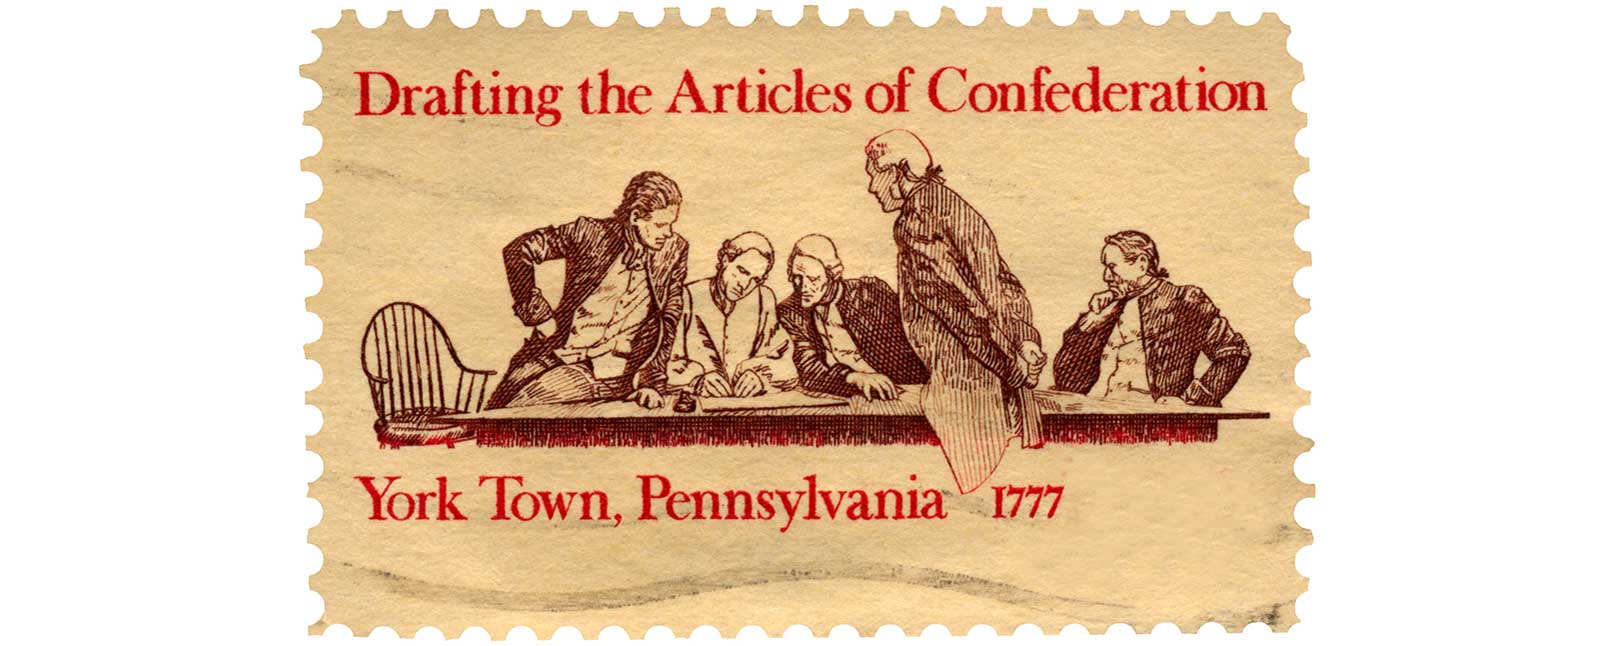 Drafting-articles-of-confederation